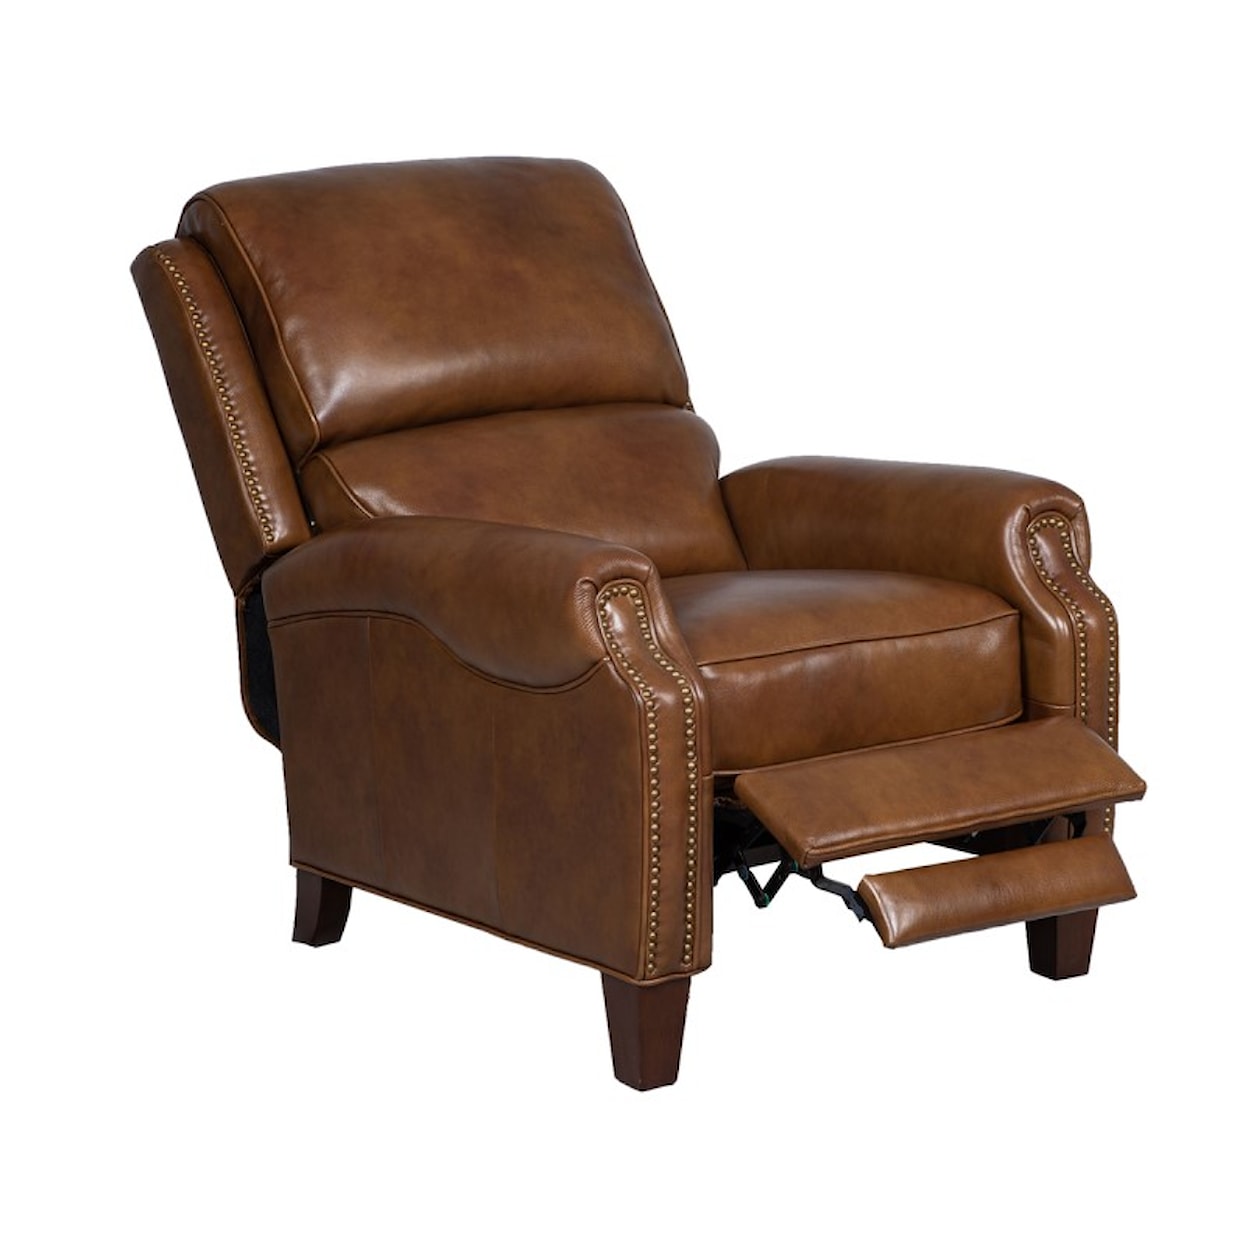 Synergy Home Furnishings 1914 Pushback Recliner